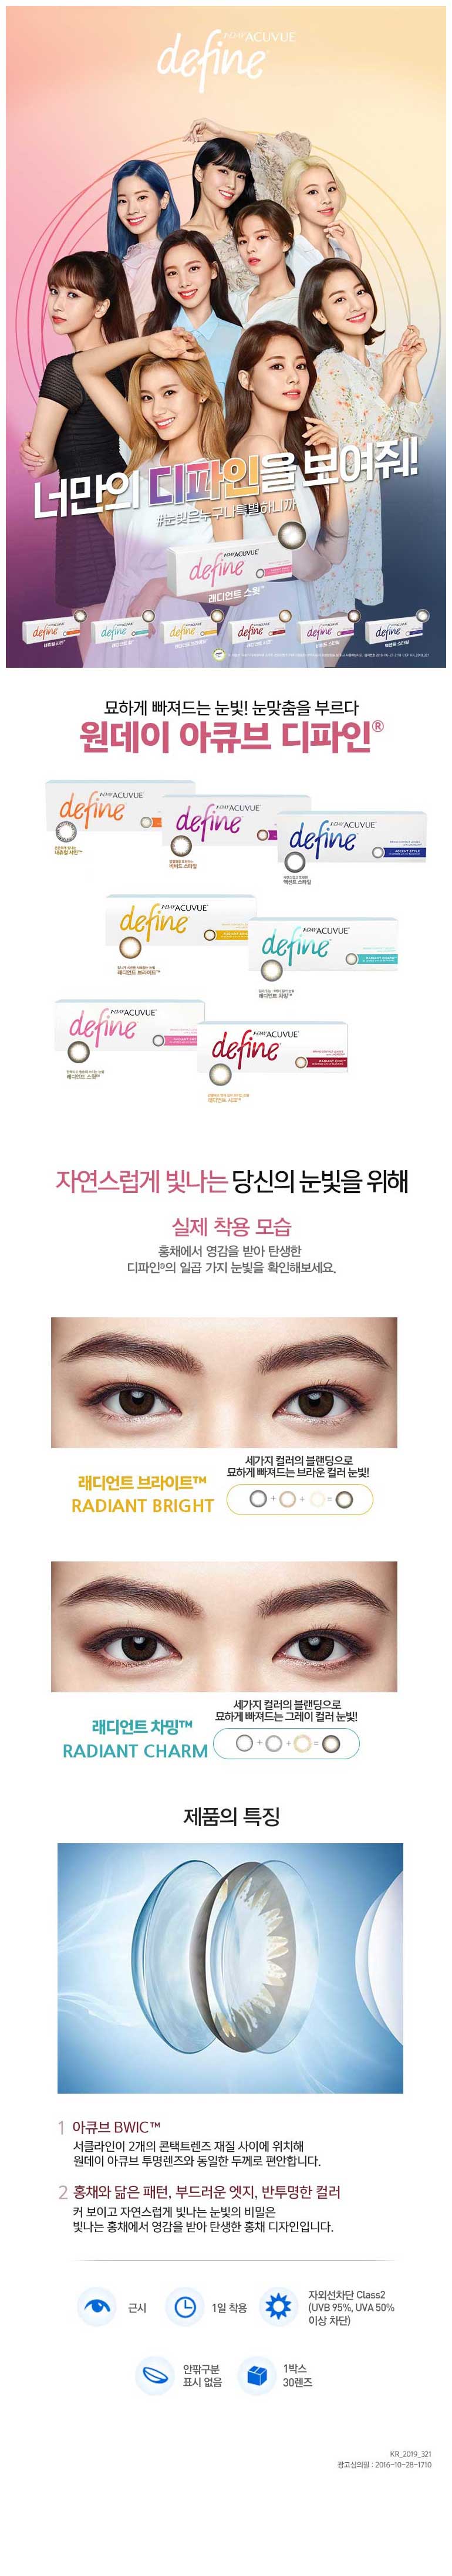 Description-image-of-Acuvue-1Day-New-Define-30pcs-Daily-Radiant-Bright-Radiant-Charm-Colored-Contacts